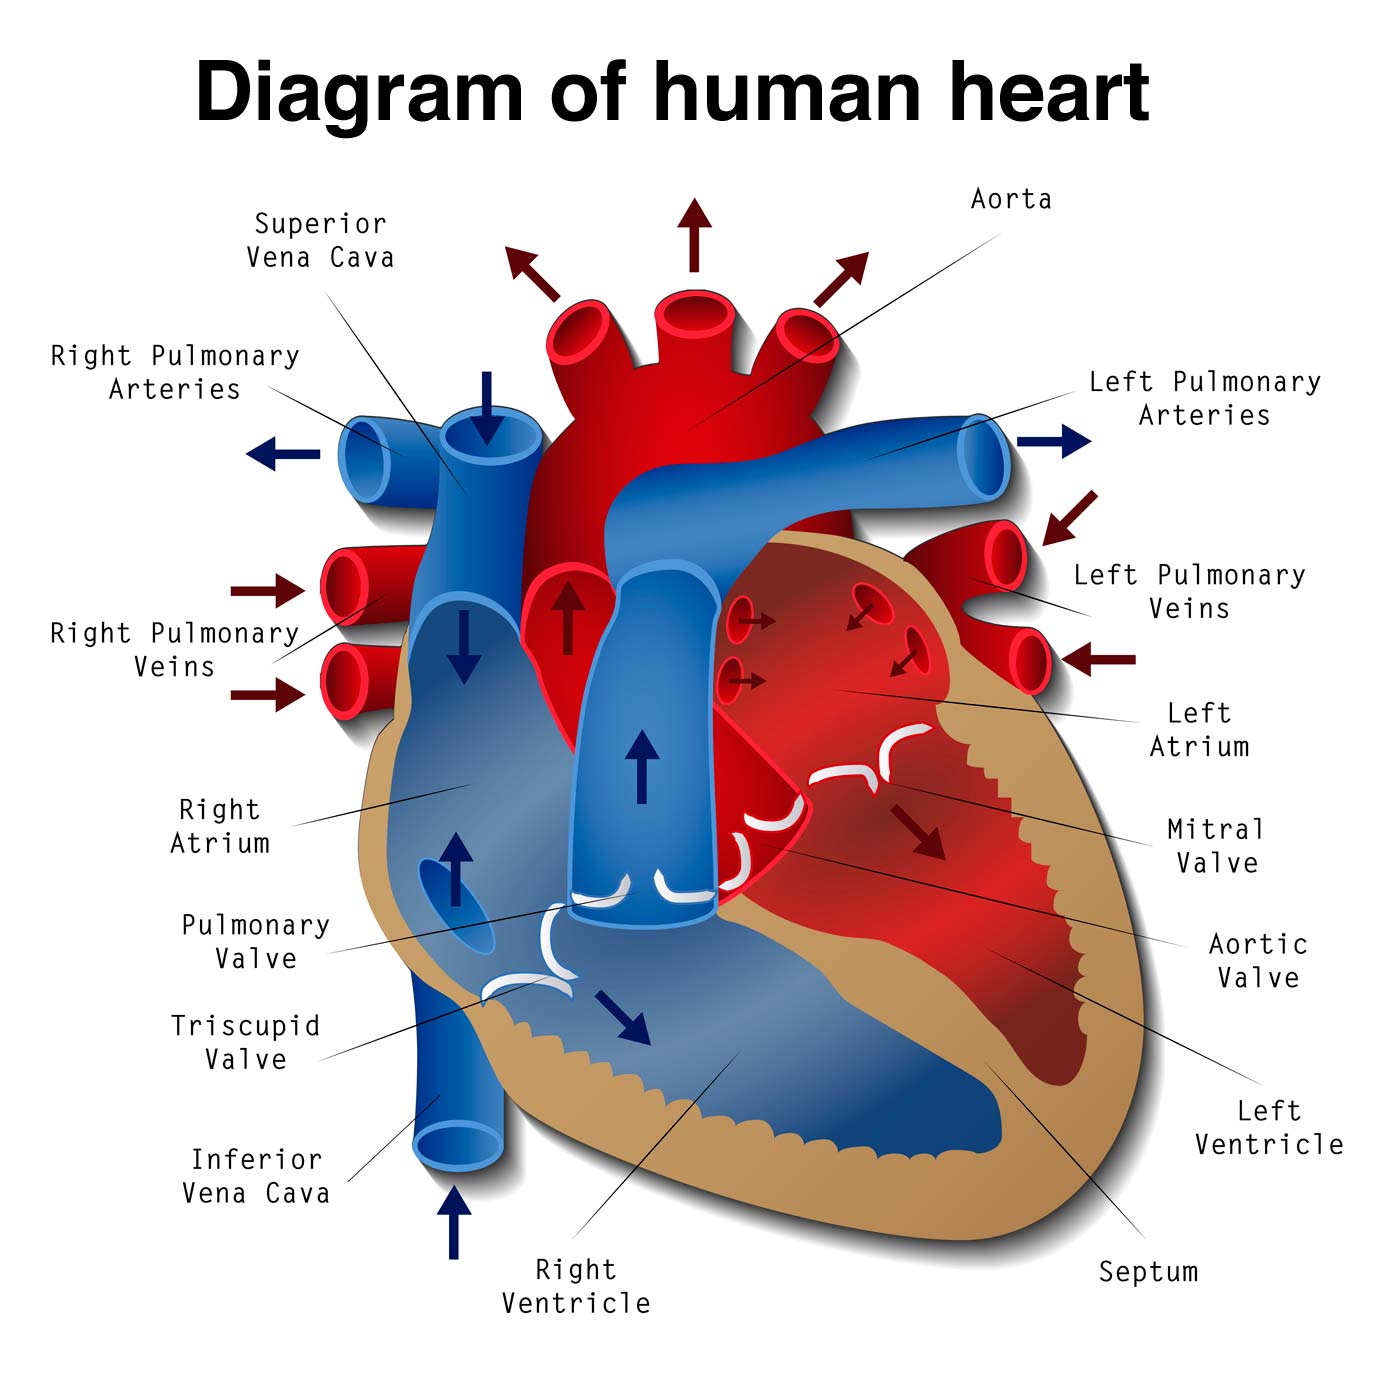 Heart Disease: Definition, Causes, Research - Medical News ...